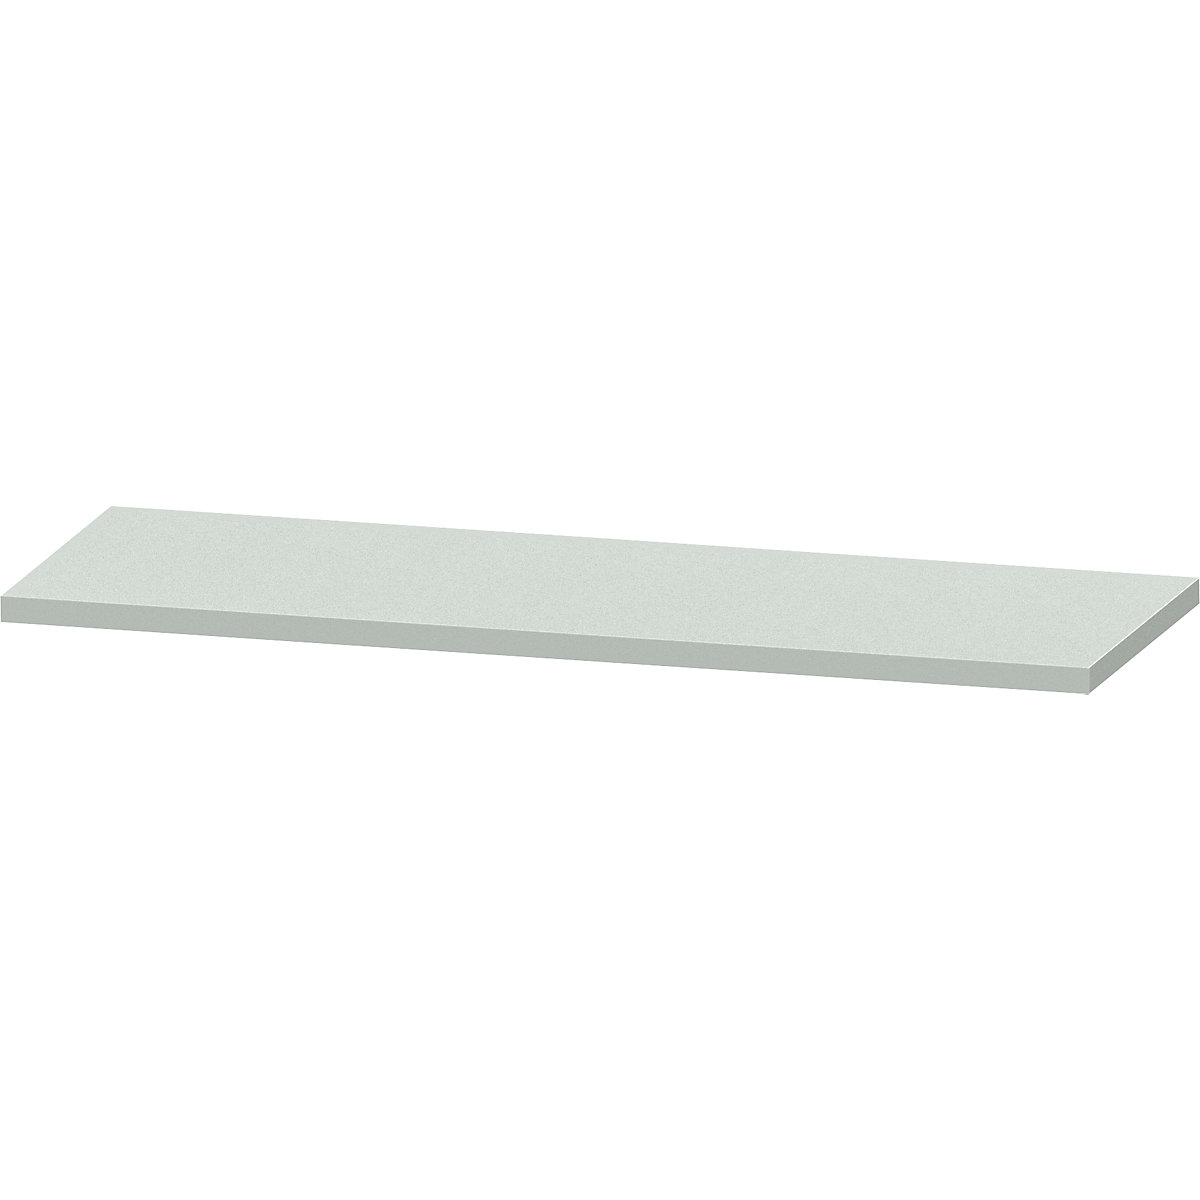 Worktop for workbench – ANKE, sheet steel covered worktop, width 2000 mm, thickness 50 mm-3